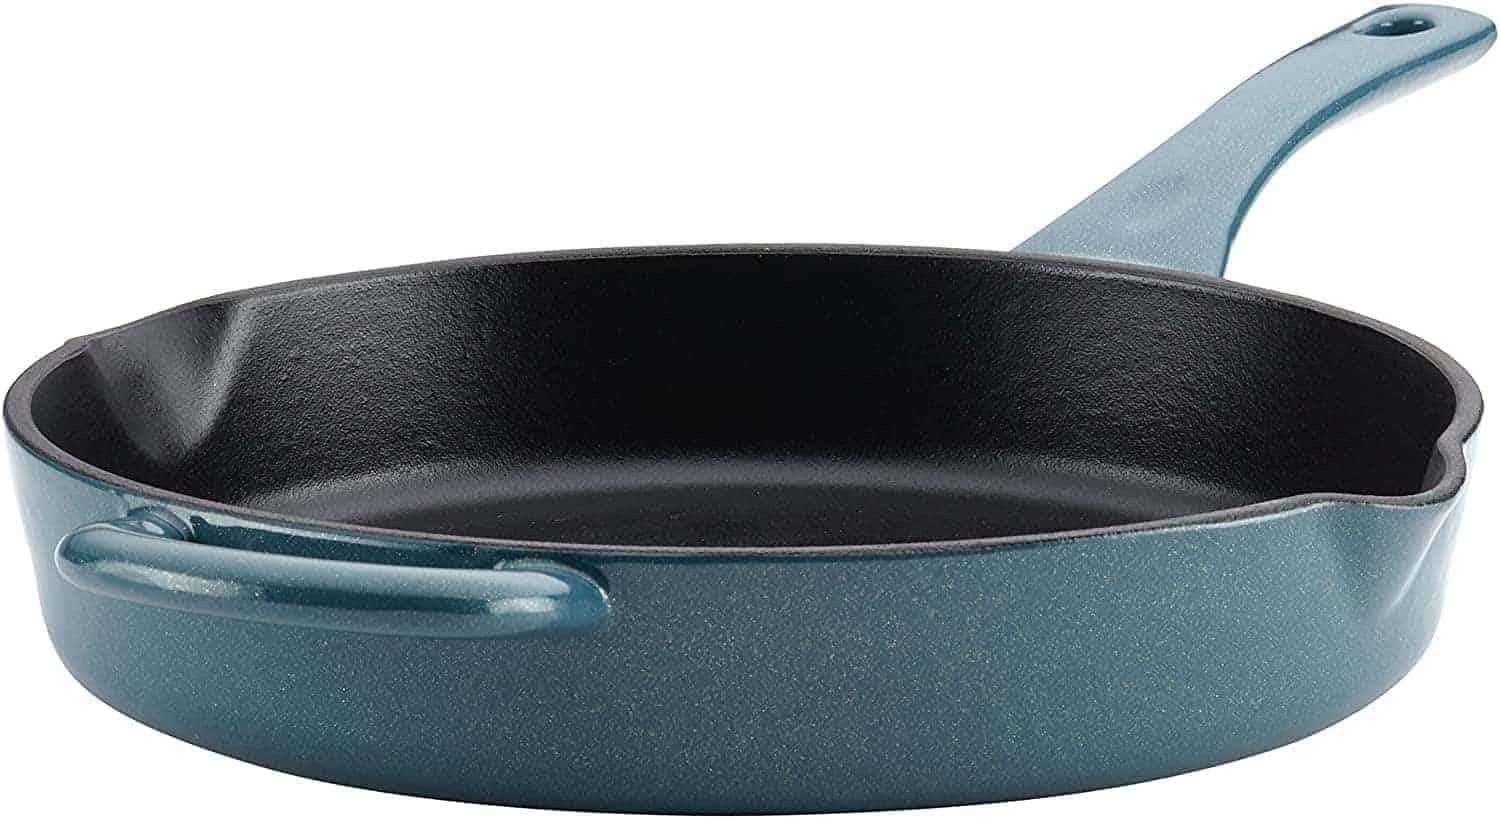 Best Enamel Pan for the Money: Ayesha Curry Kitchenware cast iron skillet